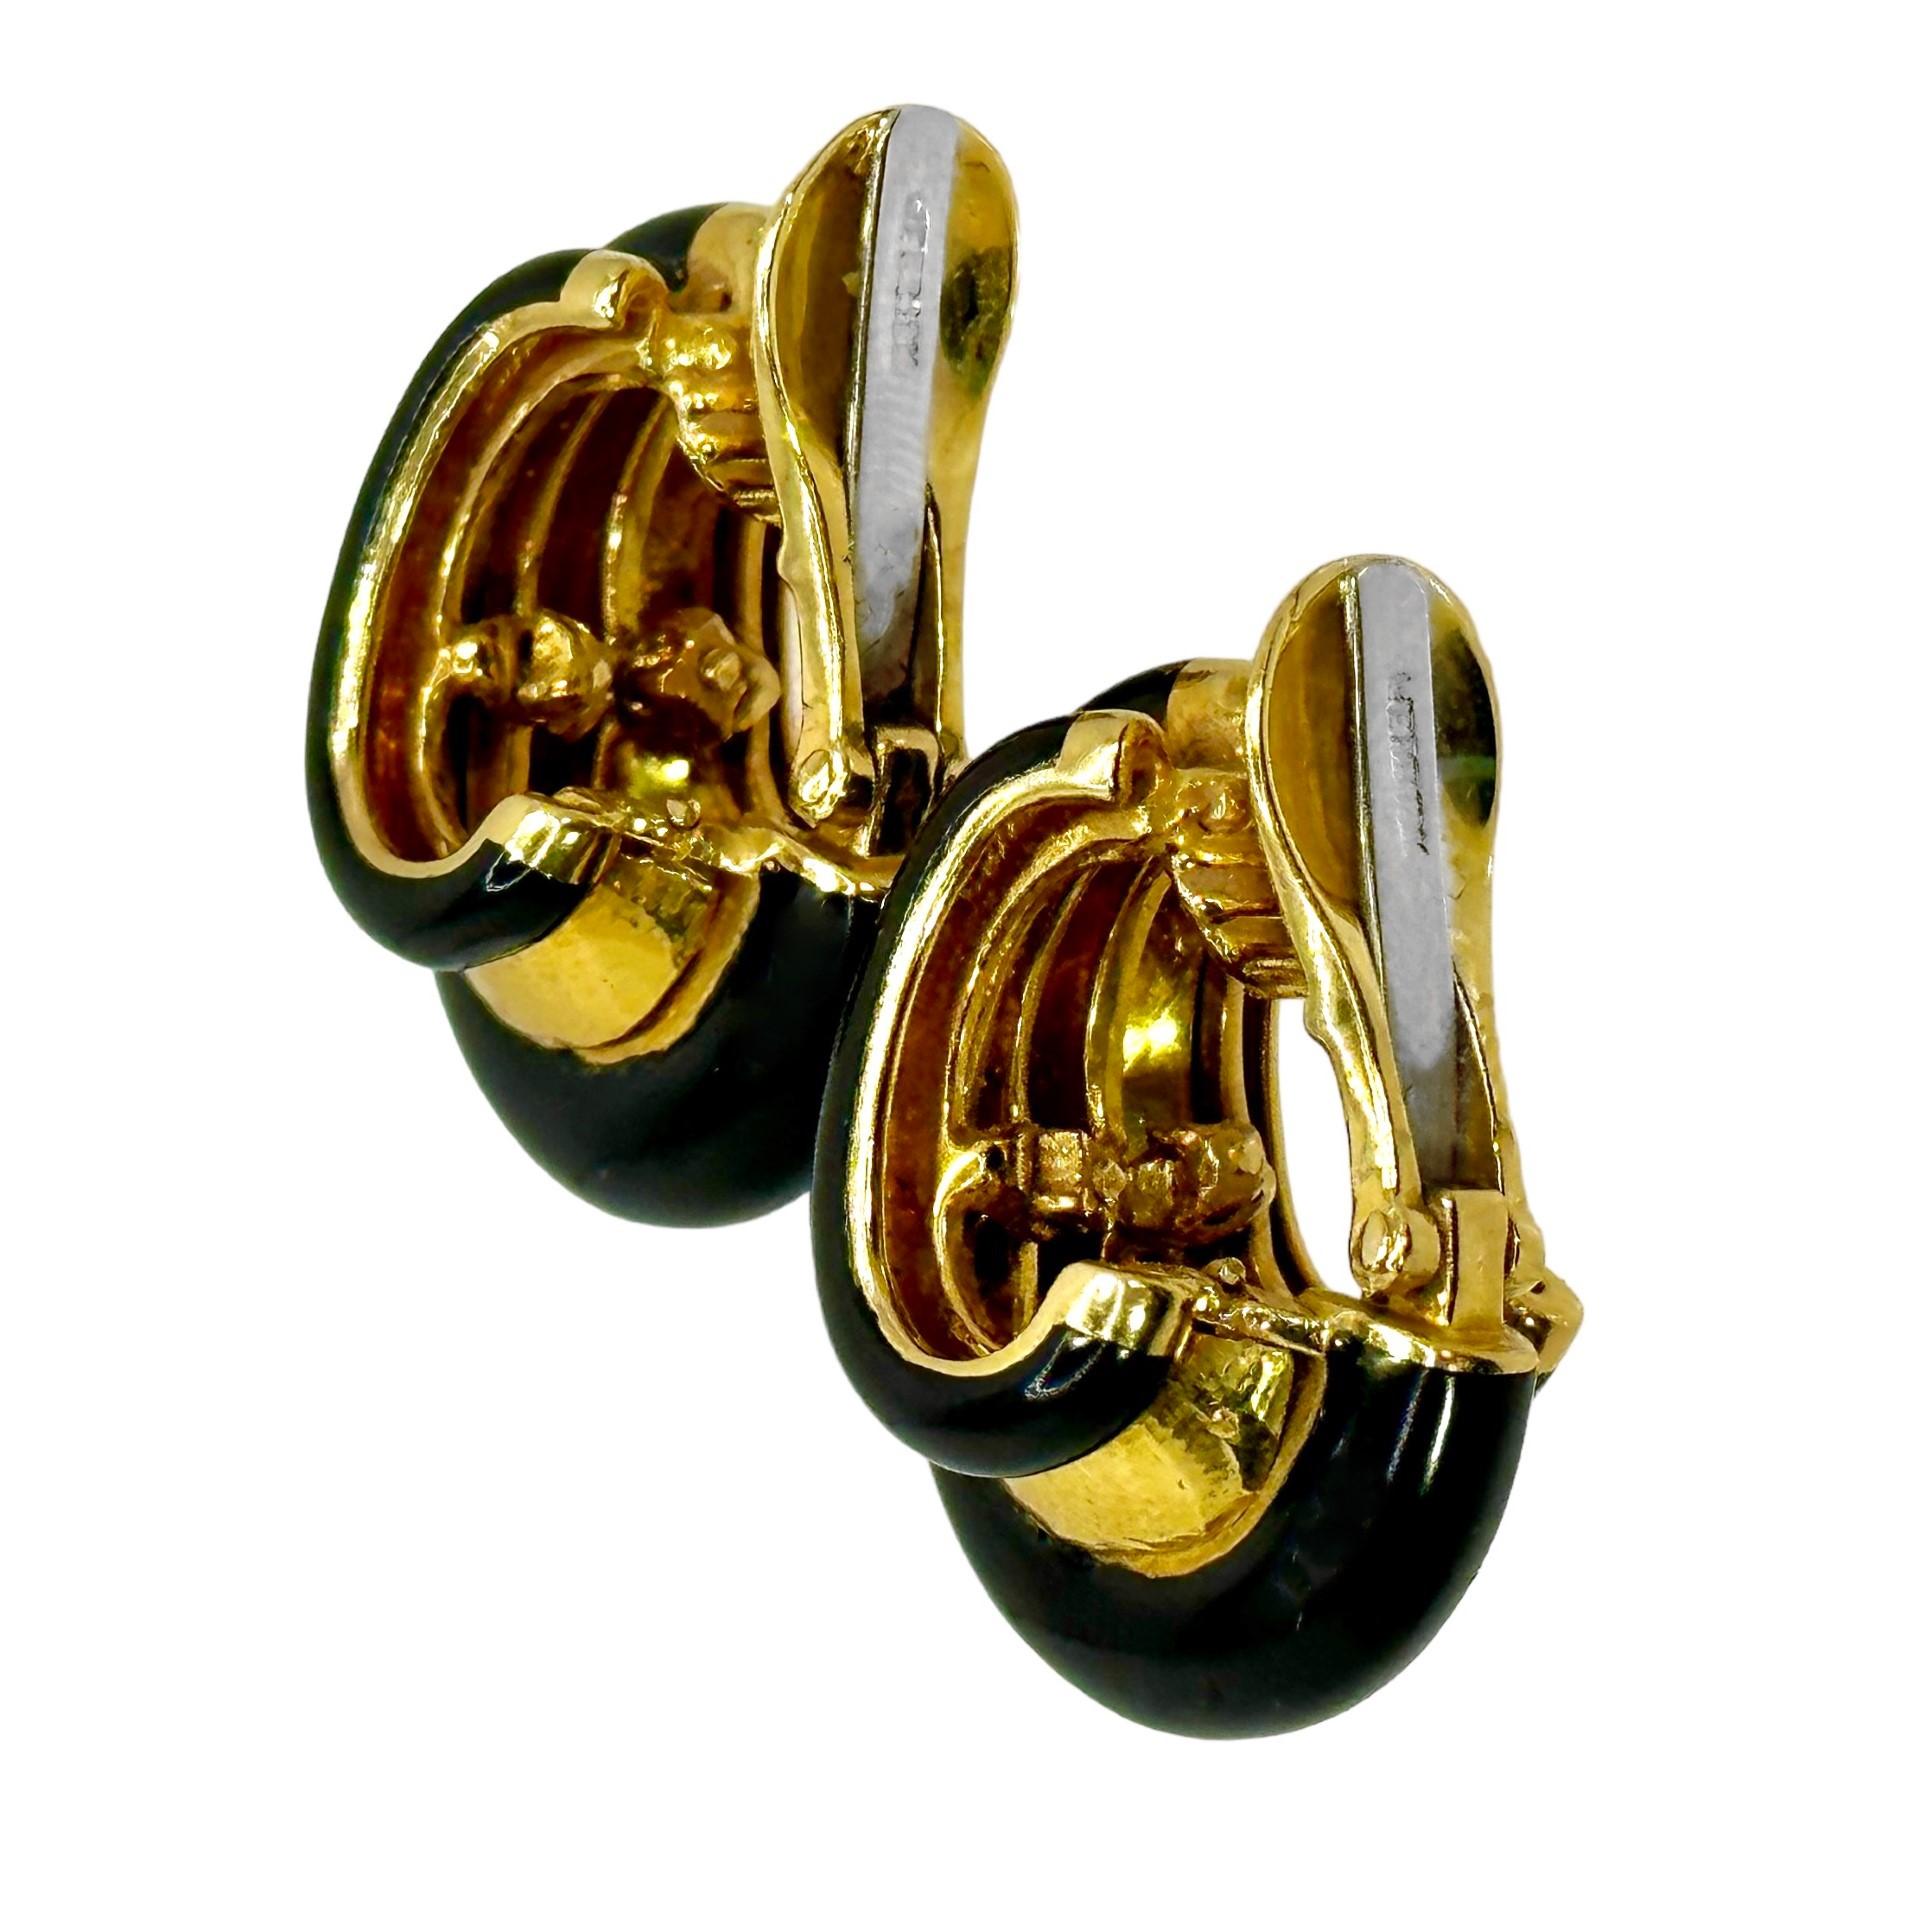 This striking pair of Mid-20th Century 18k yellow gold and shining black enamel David Webb designer hoop earrings are an unusual and not often seen design. Three broad bombe bands of black enamel radiate out towards the bottom and are separated by